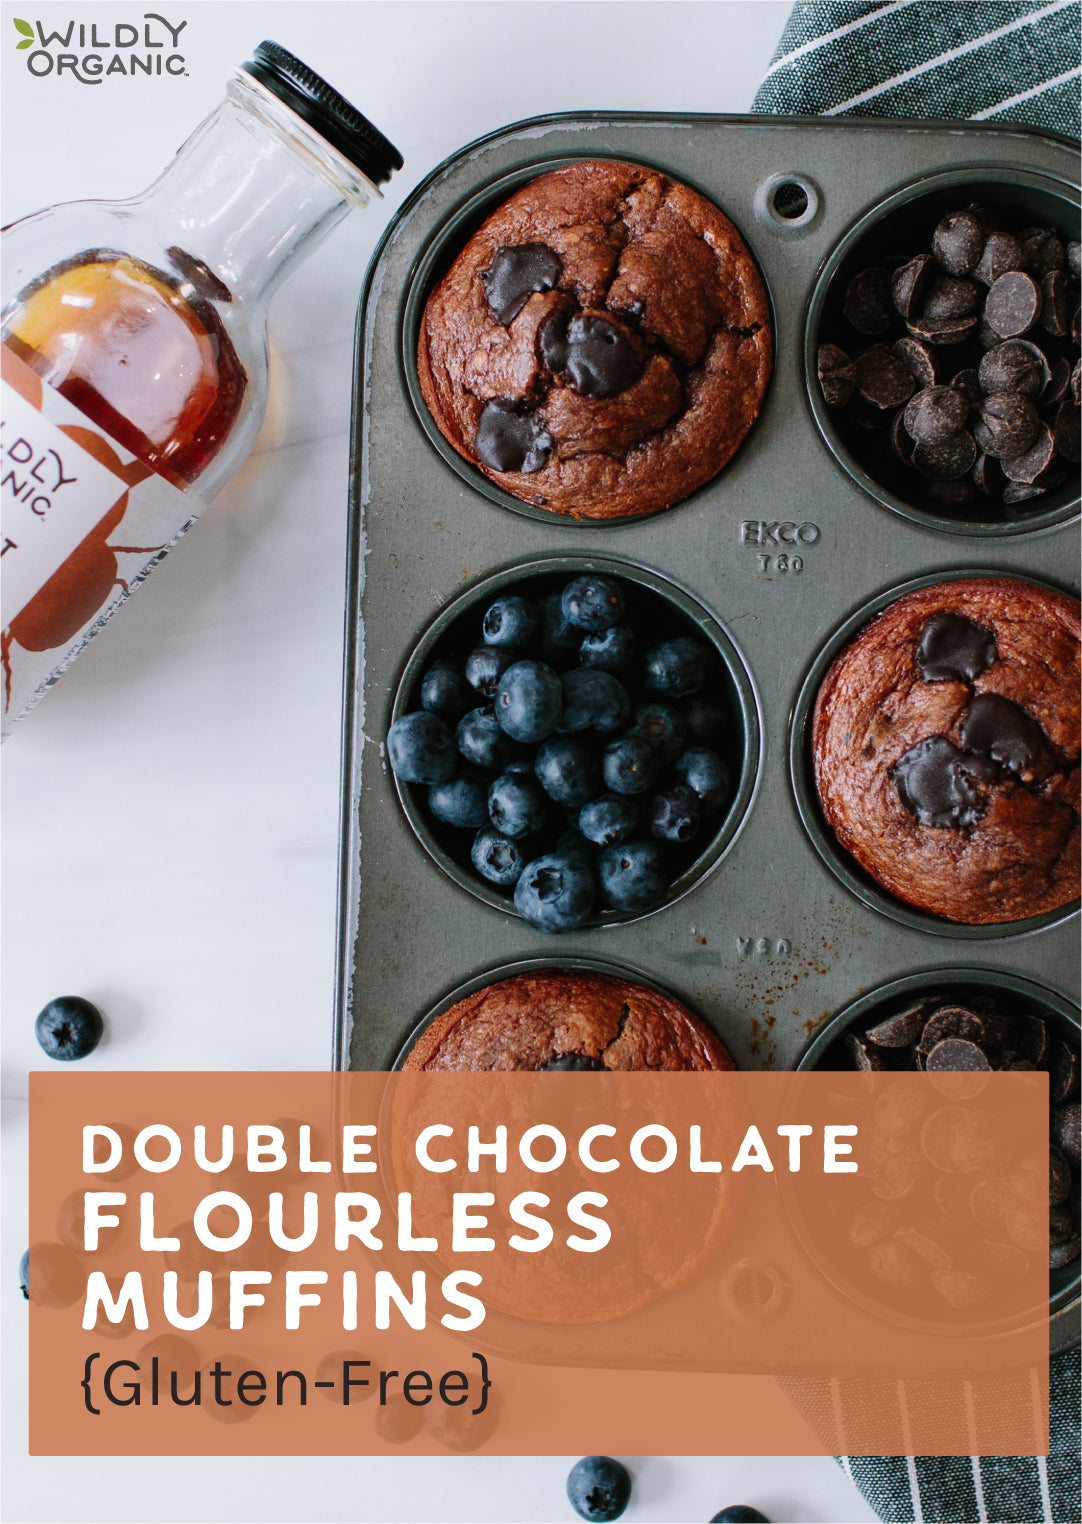 double chocolate flourless muffins in a muffin pan with a bottle of Wildly Organic coconut syrup next to them